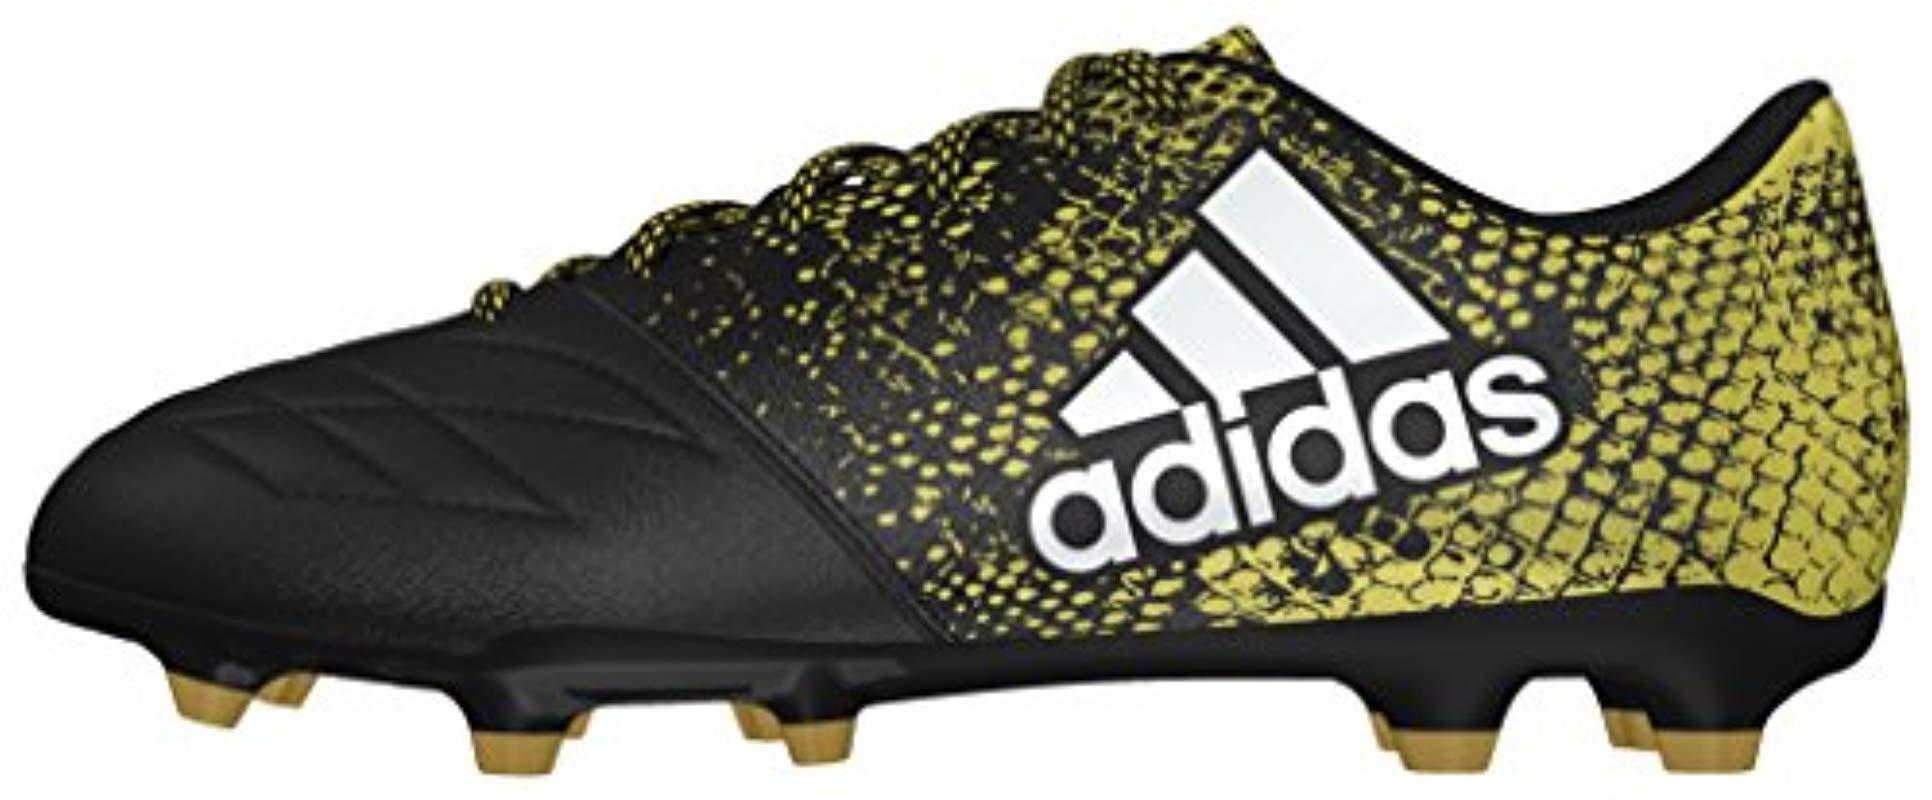 Men's Calcio Allenamento Men's Calcio Allenamento Boots adidas X 16.3 Fg  Leather cancer.org.in